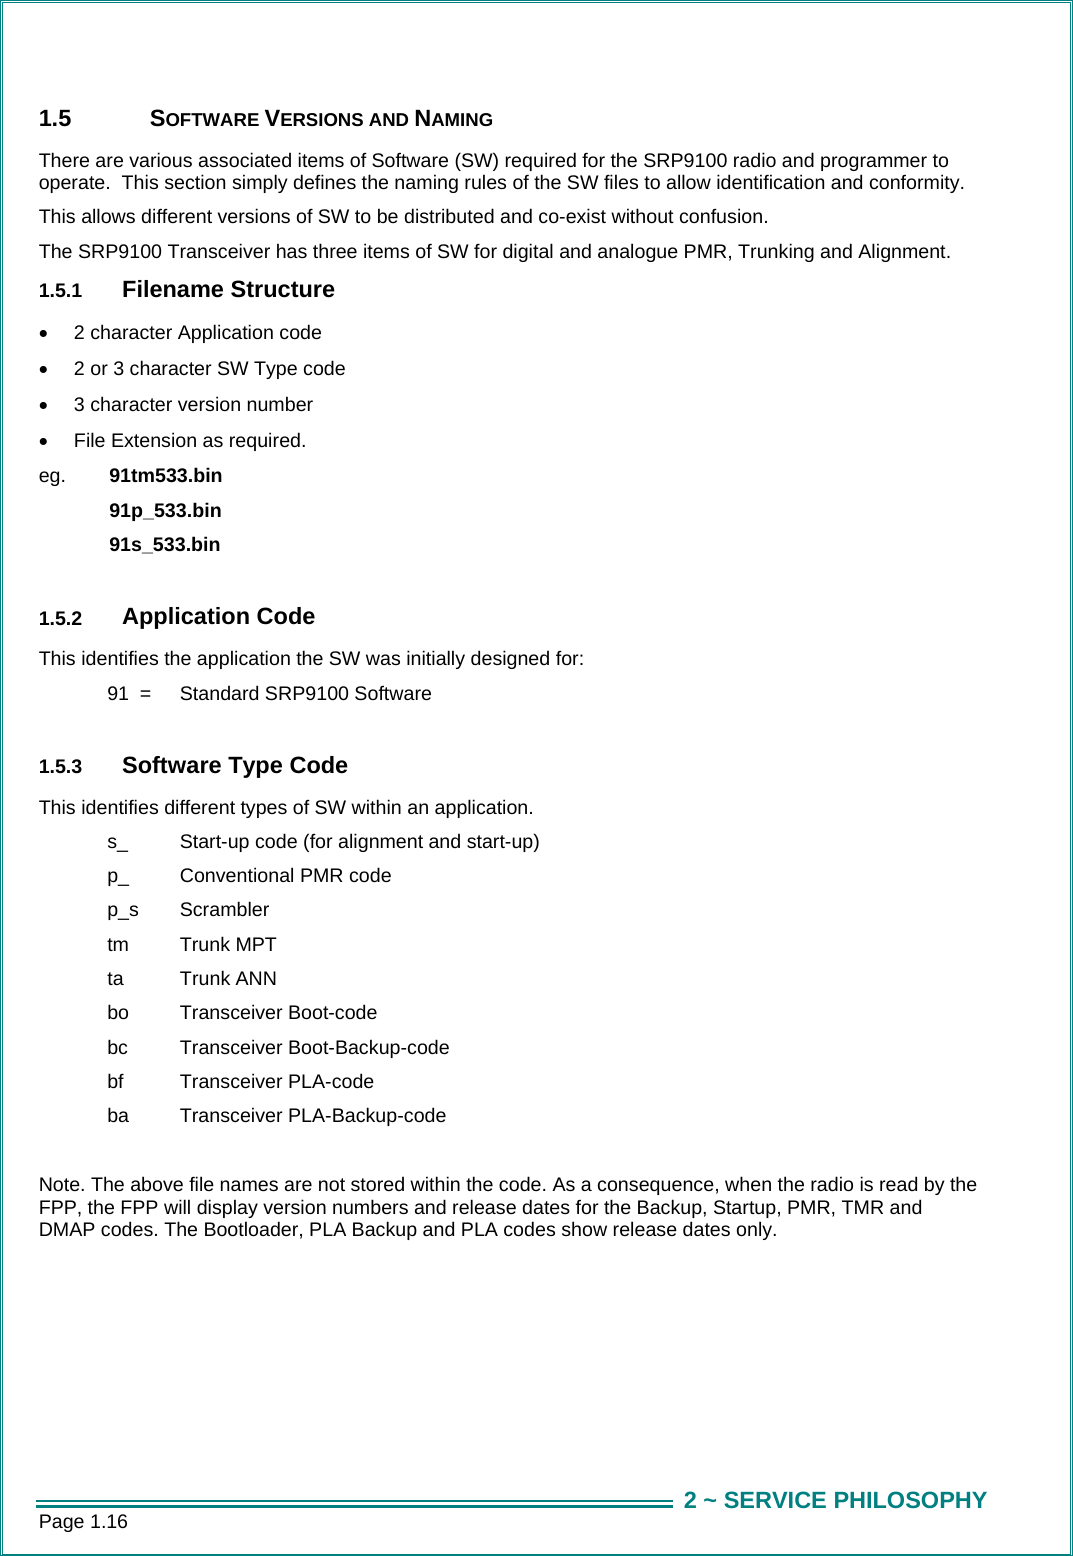 Page 1.16  2 ~ SERVICE PHILOSOPHY1.5 SOFTWARE VERSIONS AND NAMING There are various associated items of Software (SW) required for the SRP9100 radio and programmer to operate.  This section simply defines the naming rules of the SW files to allow identification and conformity.   This allows different versions of SW to be distributed and co-exist without confusion. The SRP9100 Transceiver has three items of SW for digital and analogue PMR, Trunking and Alignment.    1.5.1  Filename Structure •  2 character Application code •  2 or 3 character SW Type code •  3 character version number •  File Extension as required. eg.  91tm533.bin   91p_533.bin   91s_533.bin    1.5.2  Application Code This identifies the application the SW was initially designed for:   91  =   Standard SRP9100 Software  1.5.3  Software Type Code This identifies different types of SW within an application.   s_   Start-up code (for alignment and start-up)   p_   Conventional PMR code  p_s  Scrambler   tm   Trunk MPT   ta  Trunk ANN   bo   Transceiver Boot-code  bc  Transceiver Boot-Backup-code   bf   Transceiver PLA-code   ba   Transceiver PLA-Backup-code  Note. The above file names are not stored within the code. As a consequence, when the radio is read by the FPP, the FPP will display version numbers and release dates for the Backup, Startup, PMR, TMR and DMAP codes. The Bootloader, PLA Backup and PLA codes show release dates only. 